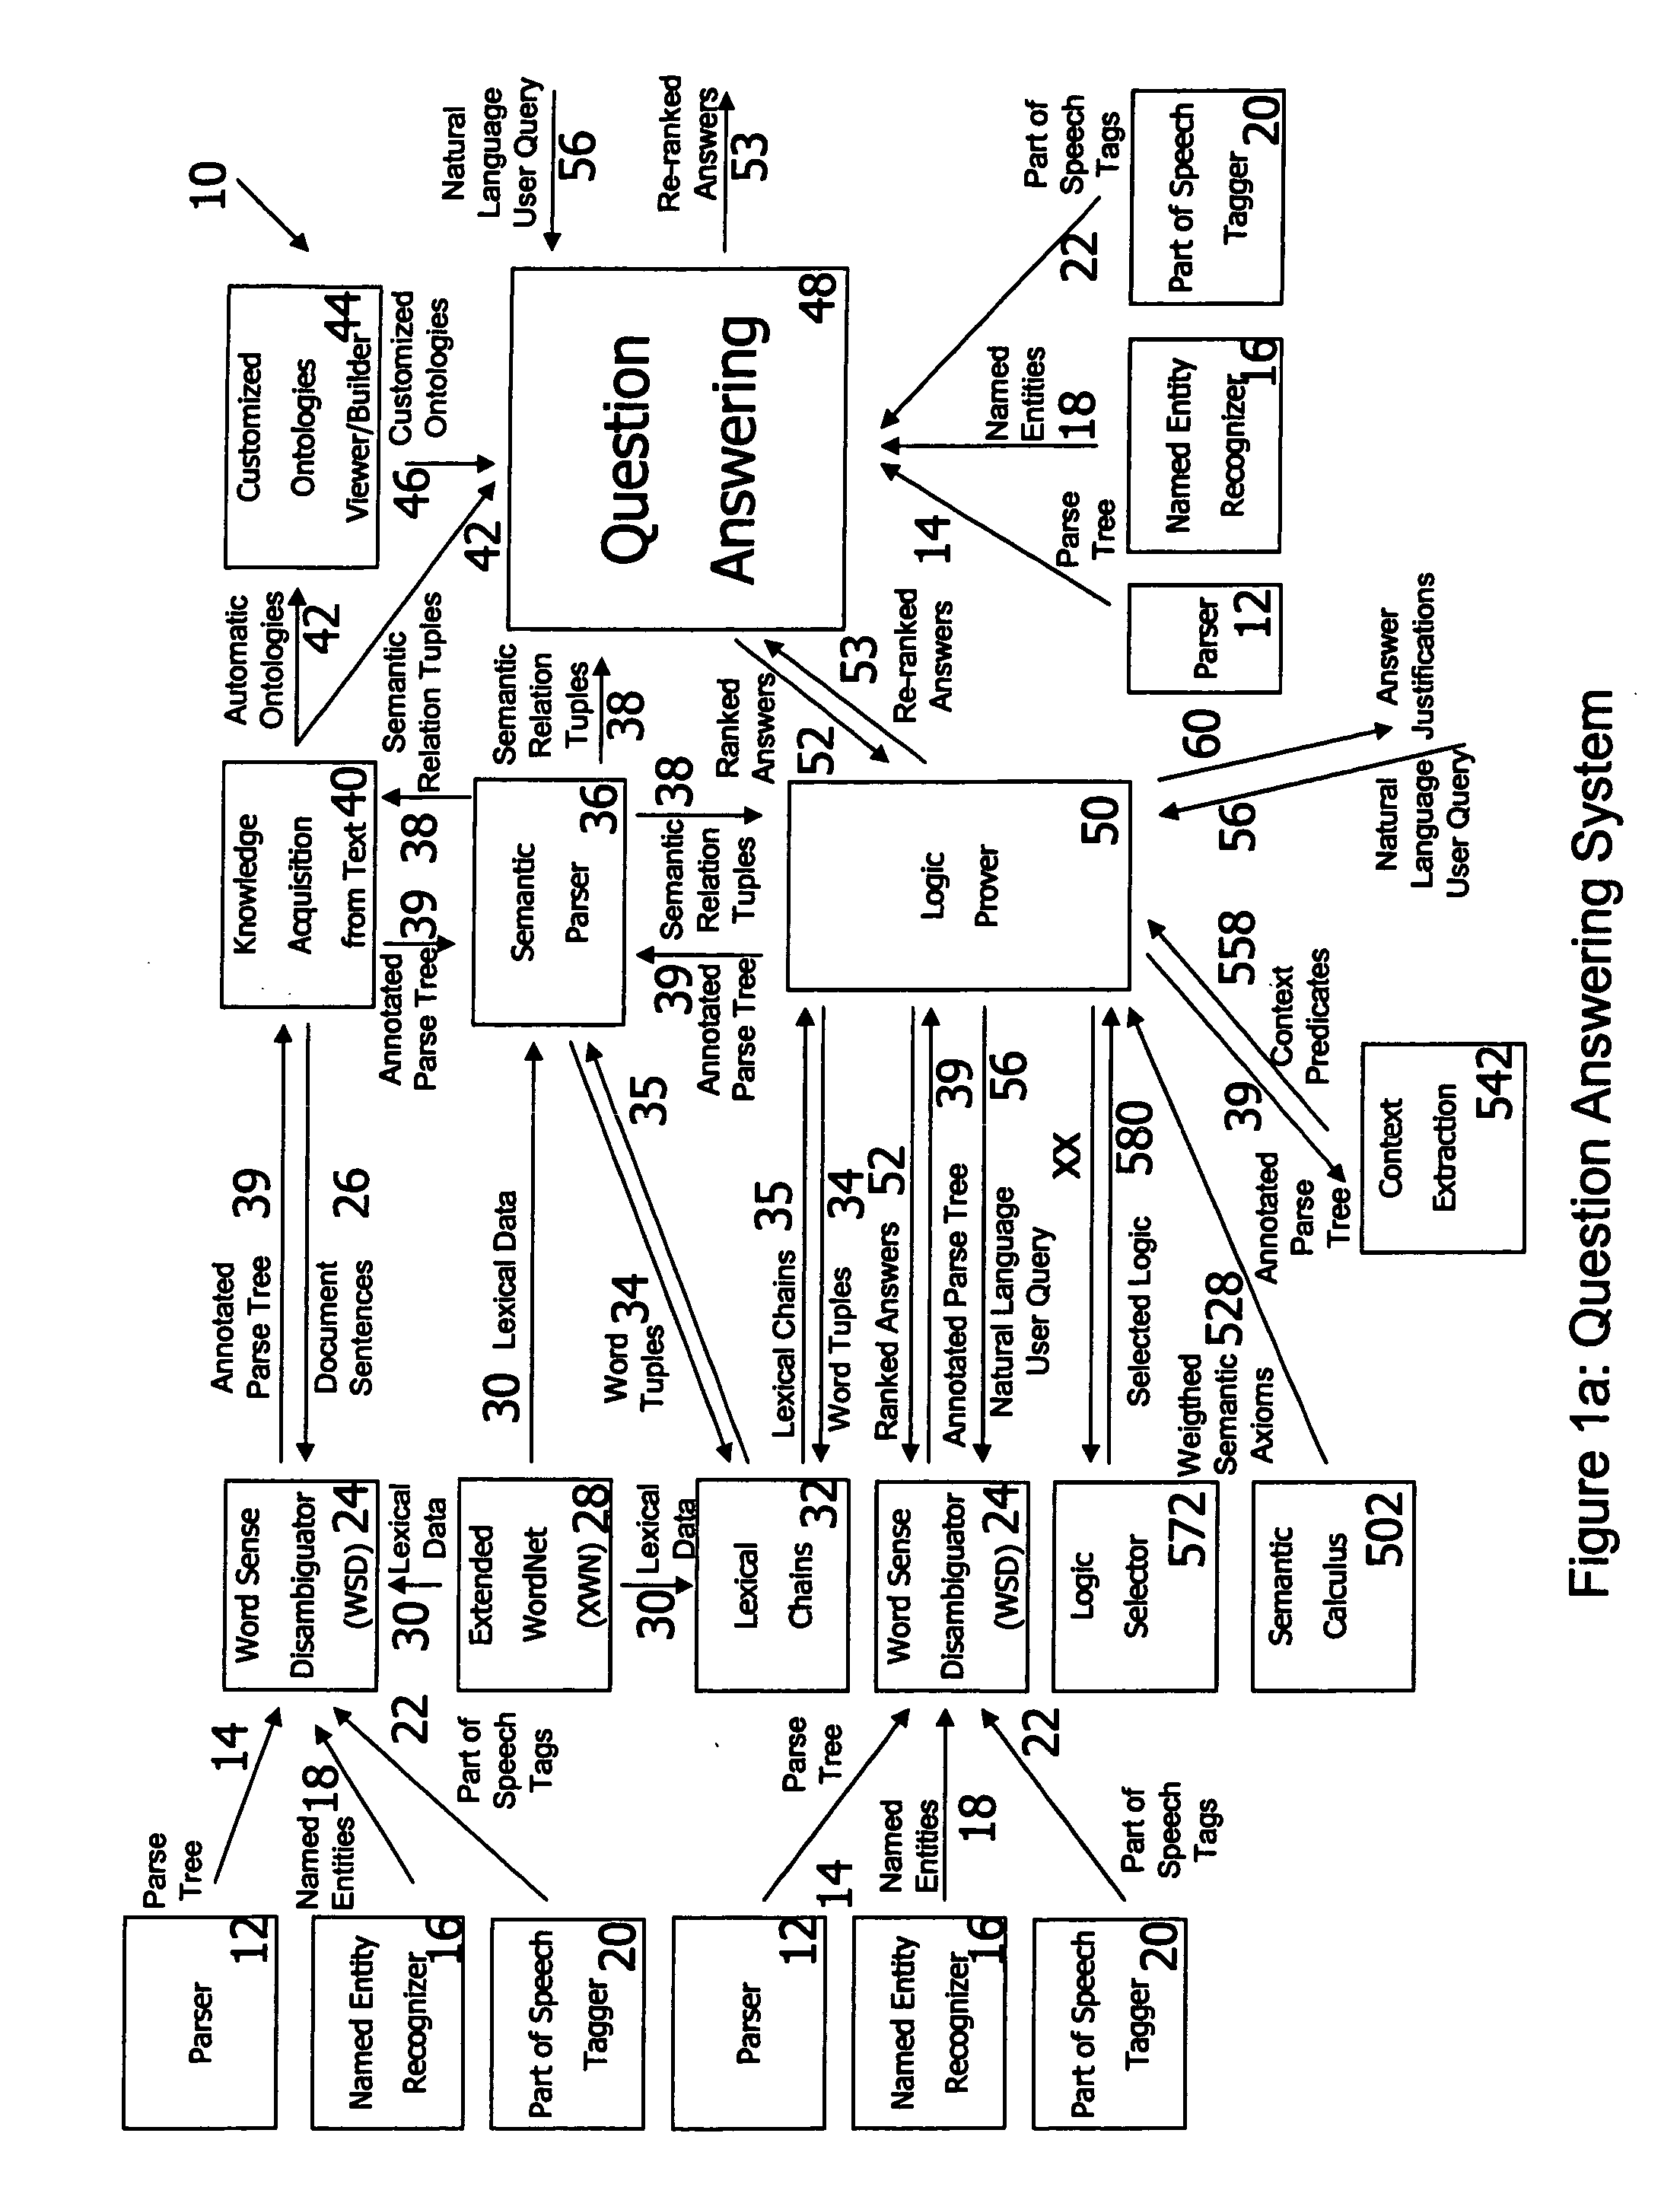 Natural language question answering system and method utilizing multi-modal logic